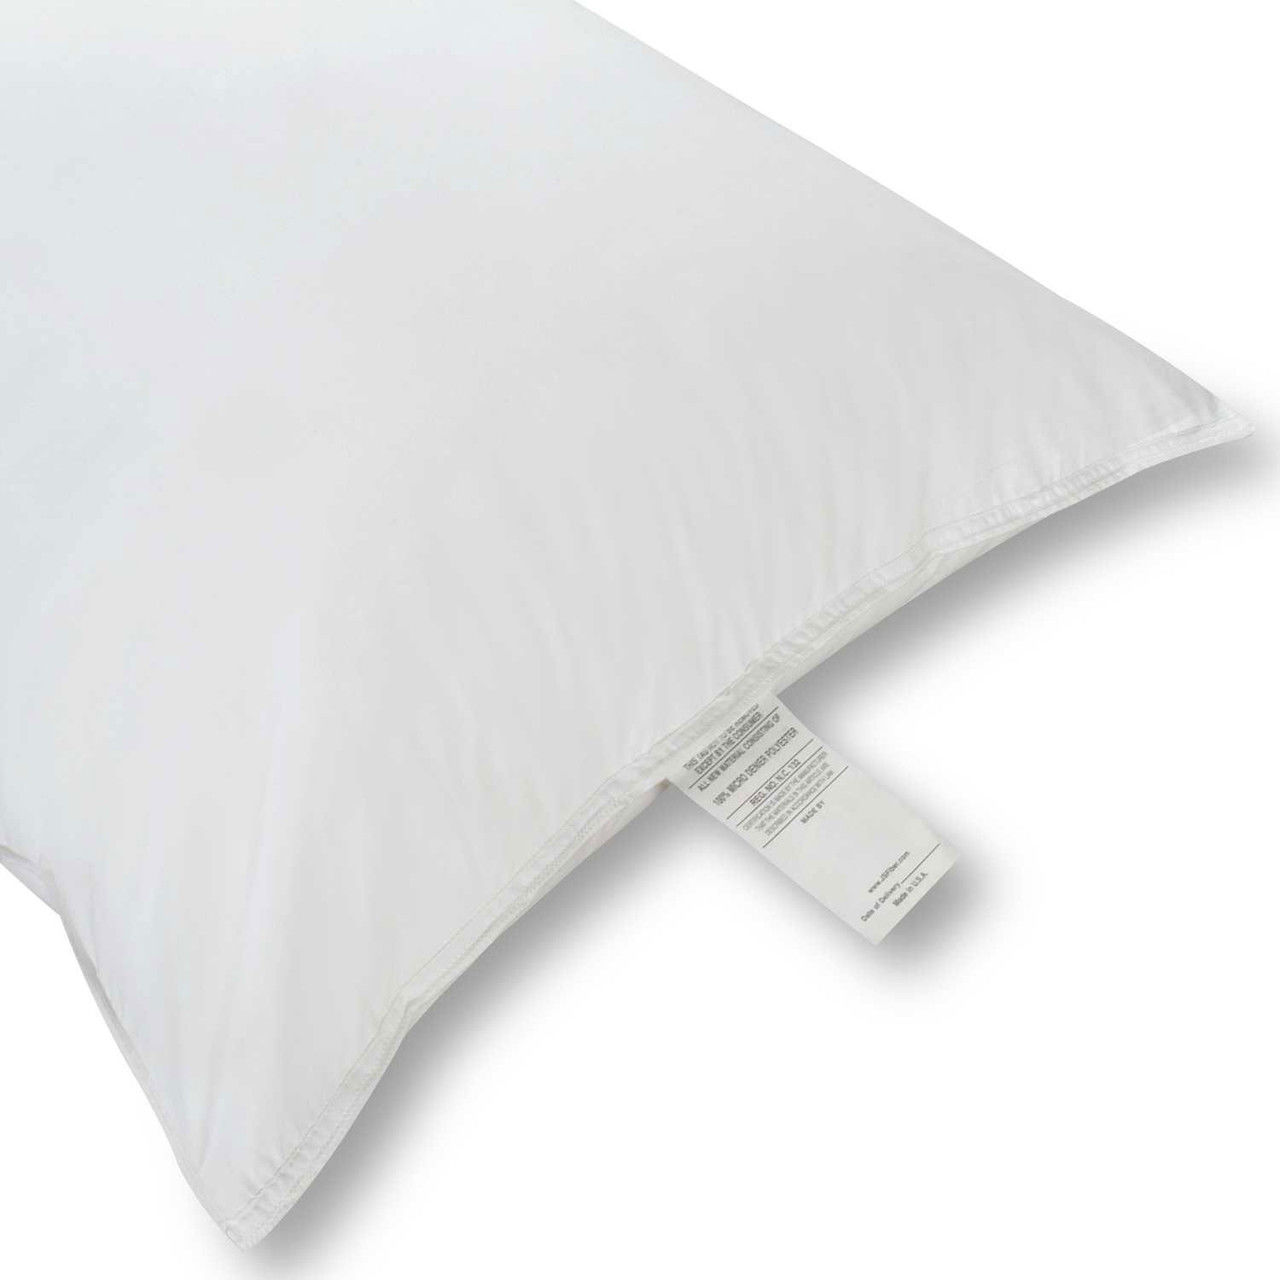 Can the Micro Denier pillow withstand frequent washing and drying?